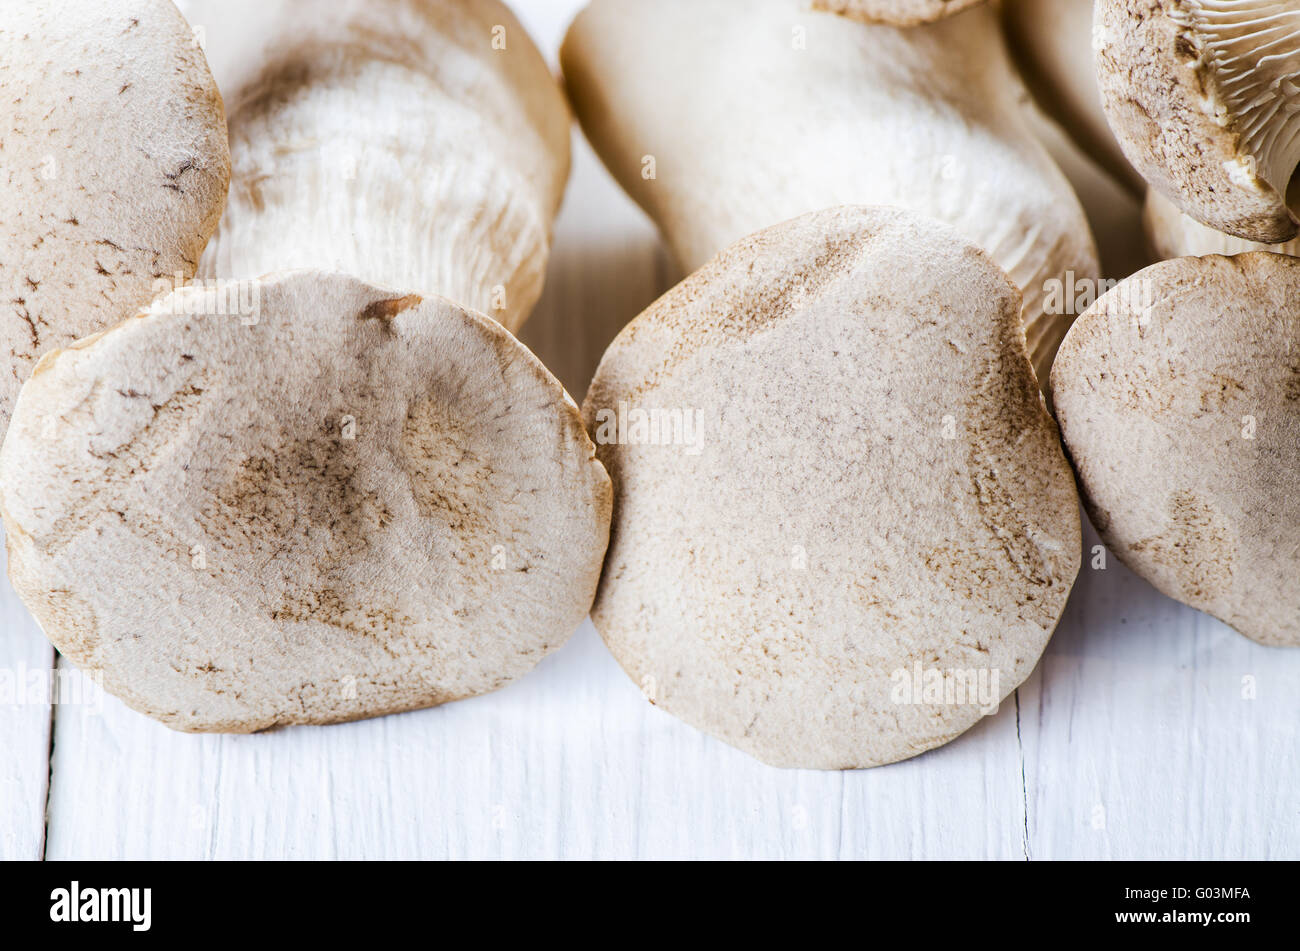 King oyster mushrooms on a white wooden table Stock Photo